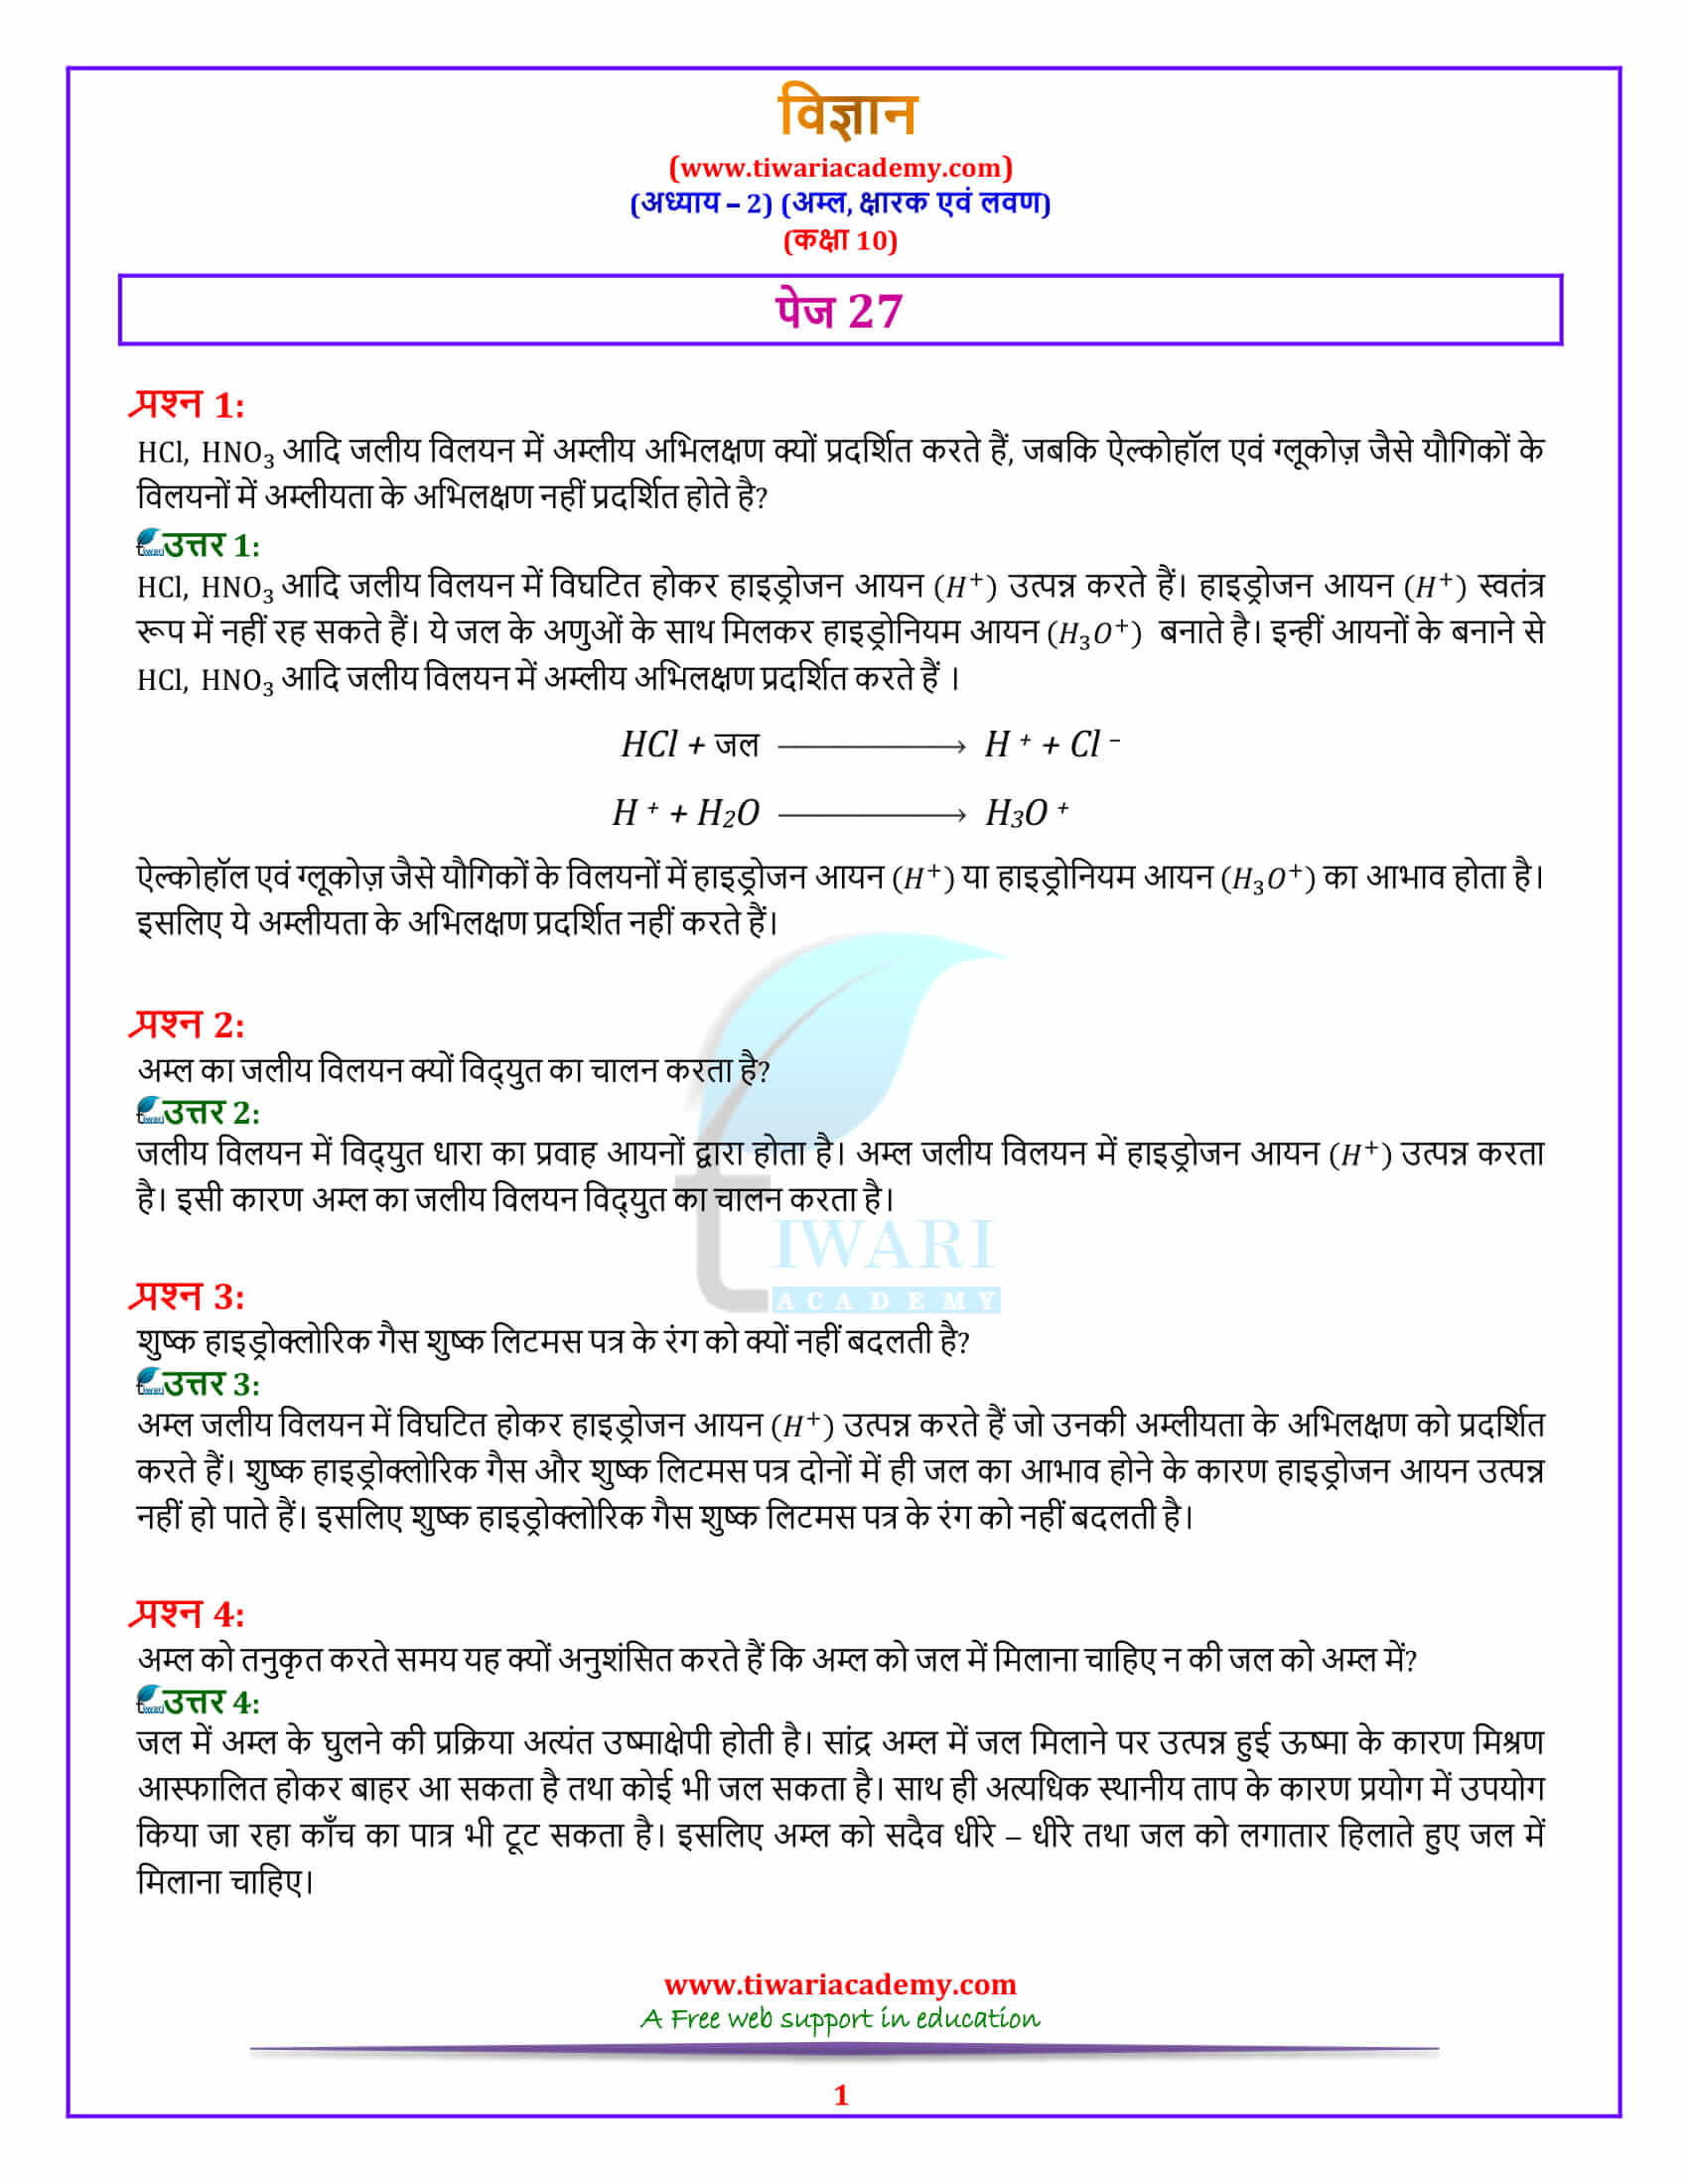 10 Science Chapter 2 Acids, Bases and Salts Intext questions पेज 27 के उत्तर